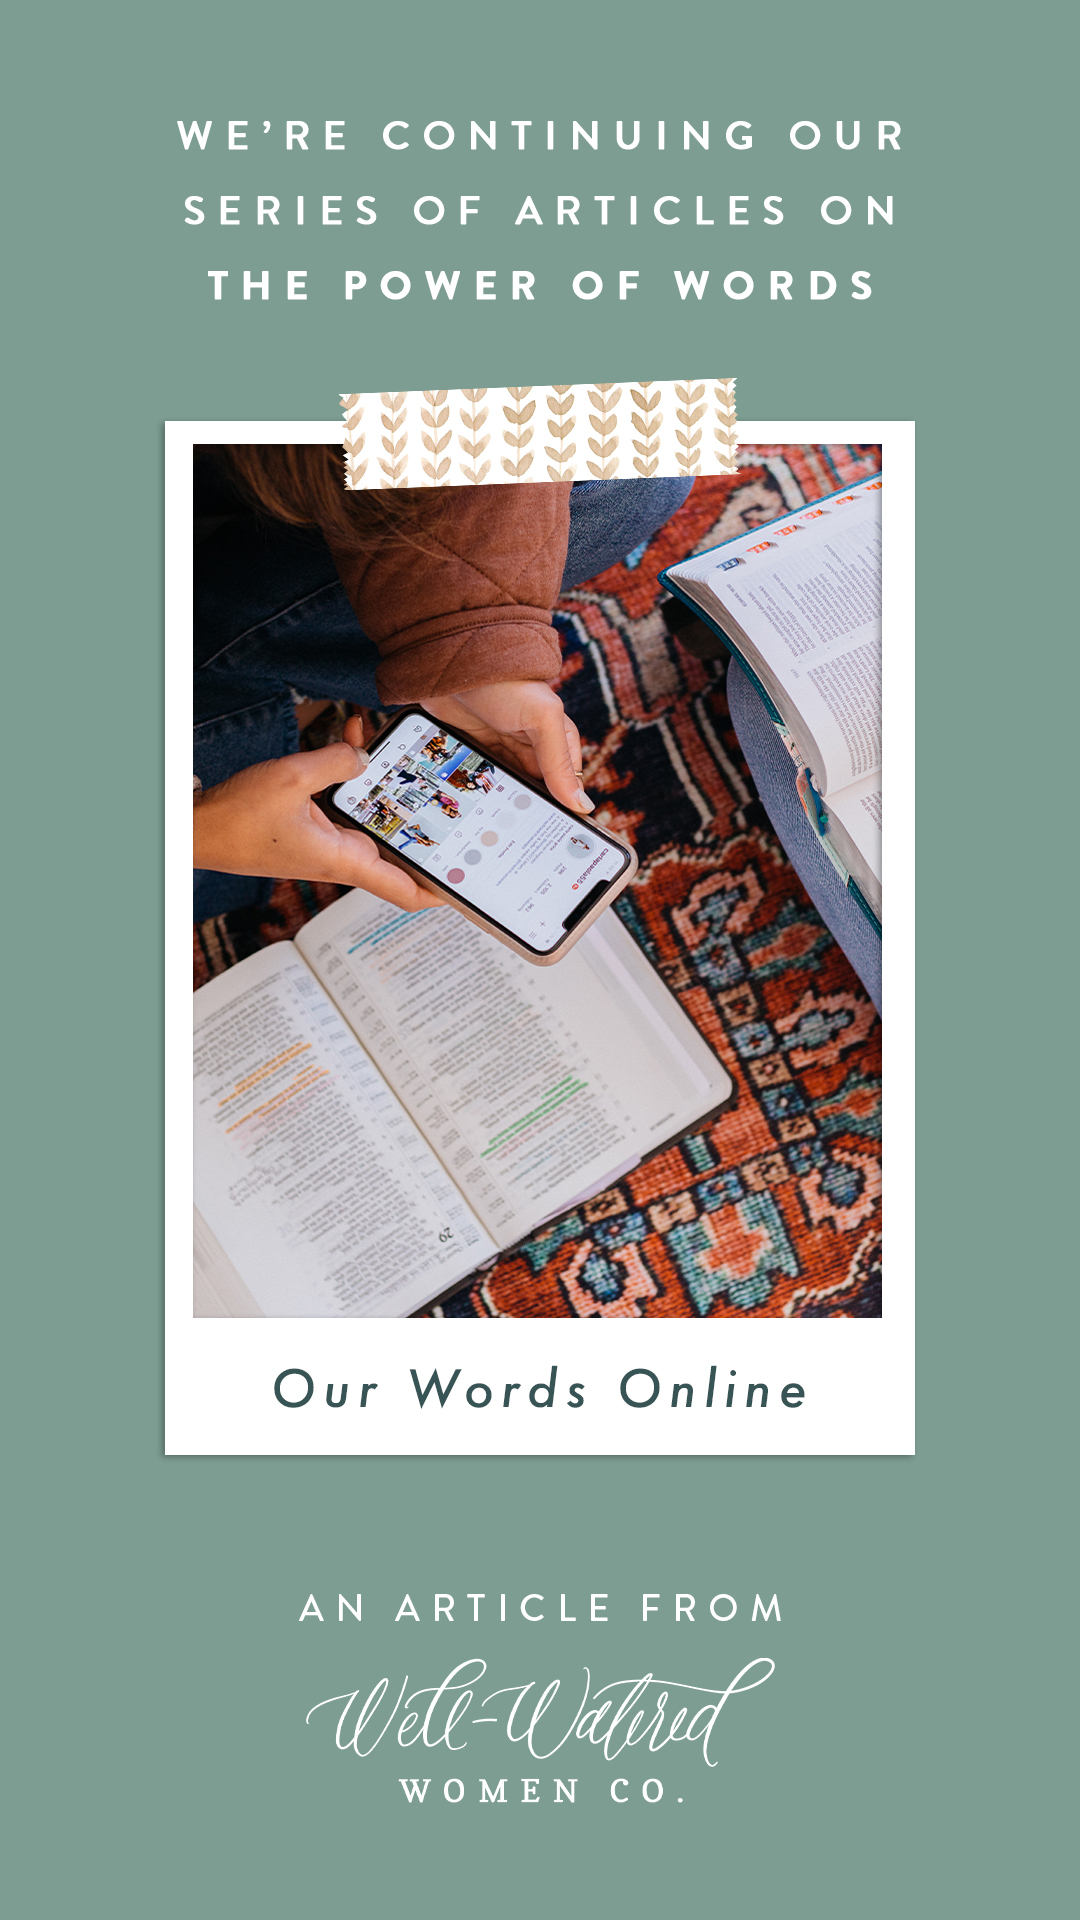 Our Words Online - The Power of Words - An Article by Well-Watered Women